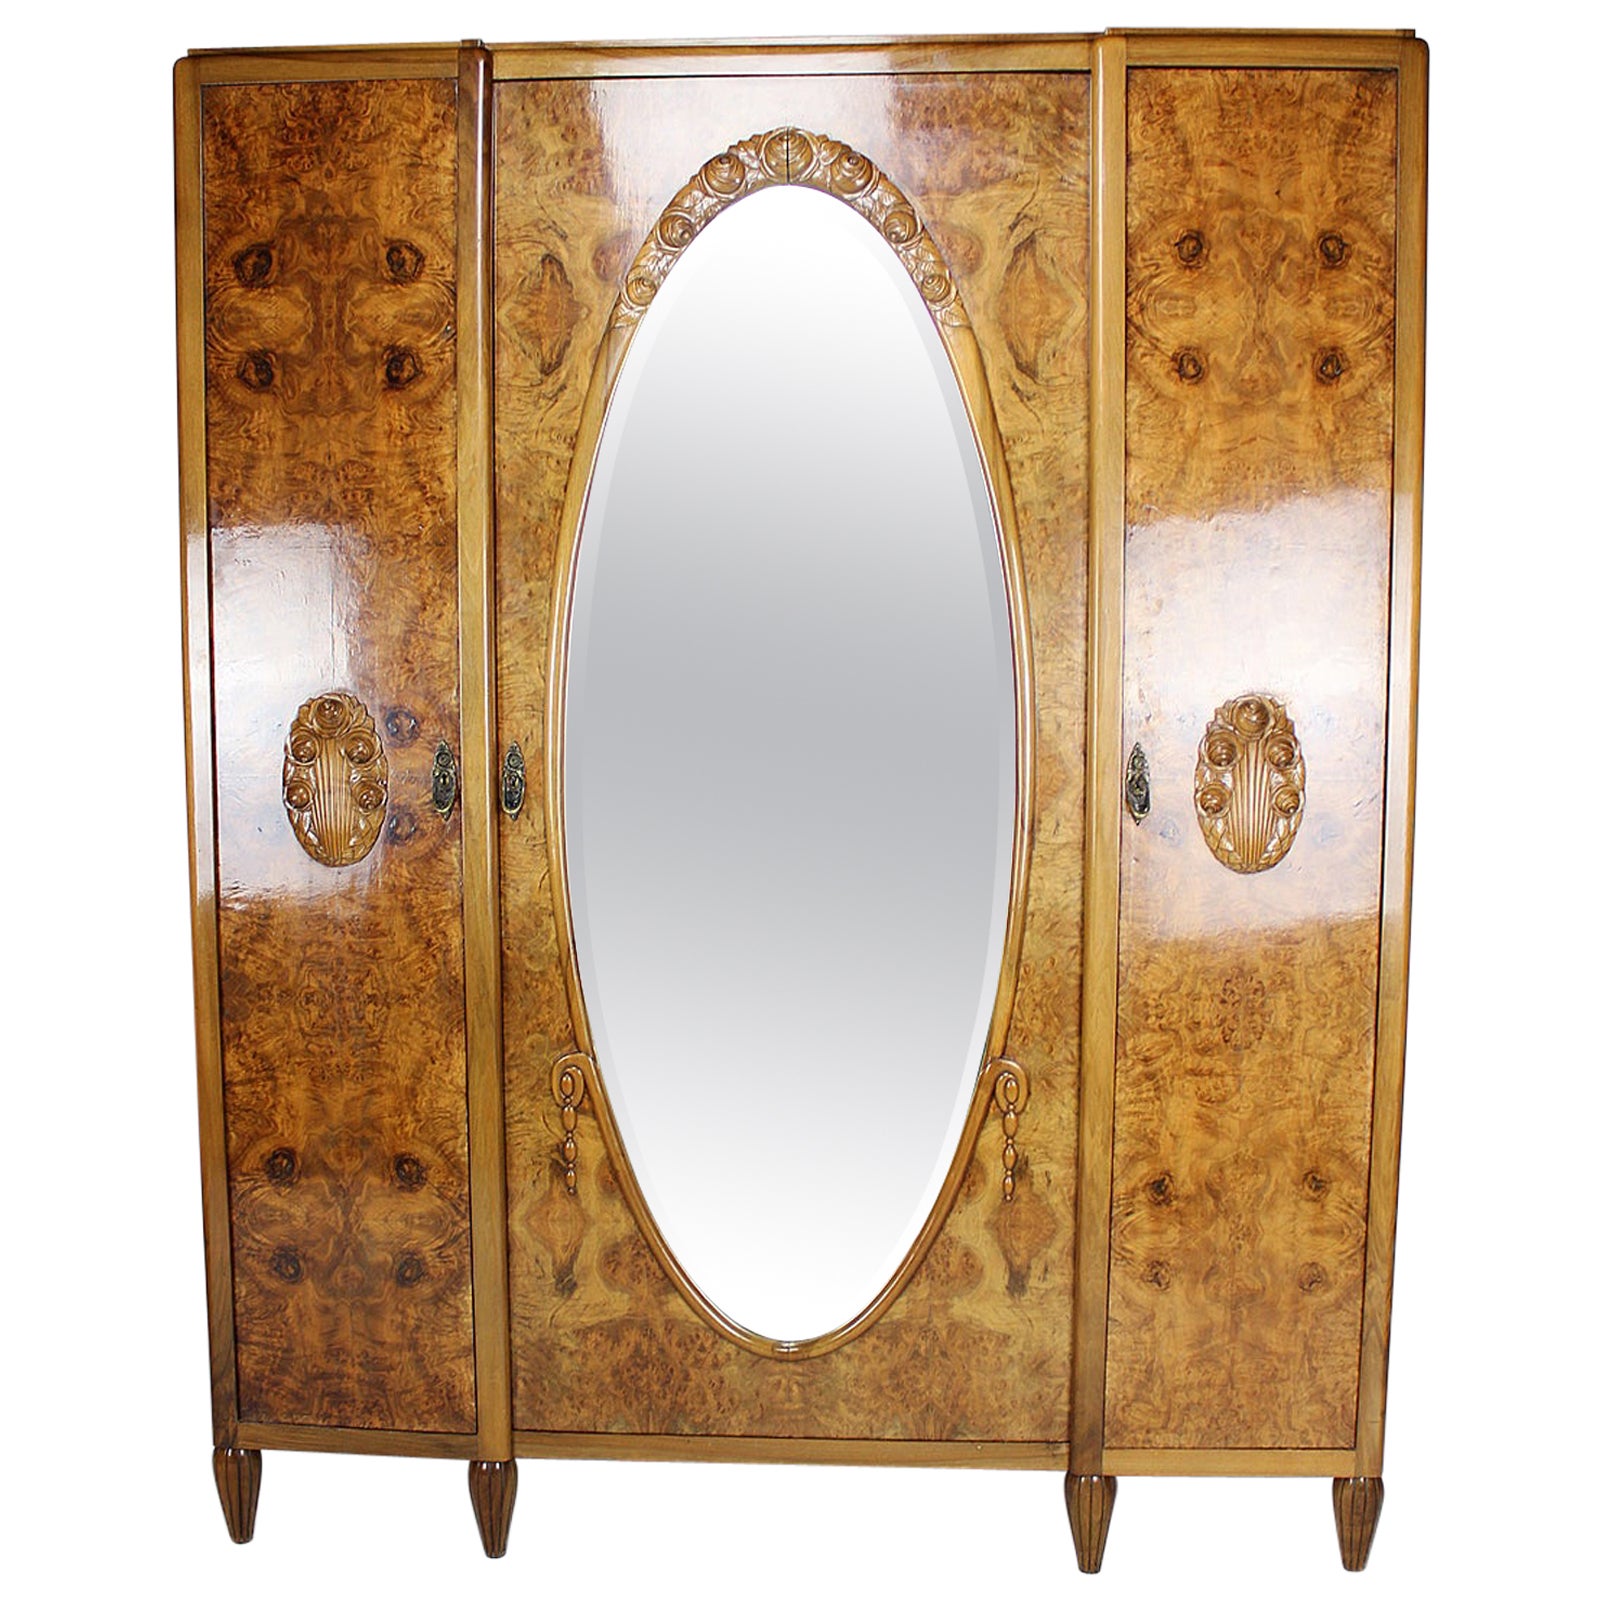 Art Deco Wardrobe by Ateliers Gauthier-Poinsignon in walnut, circa 1920-1930 For Sale